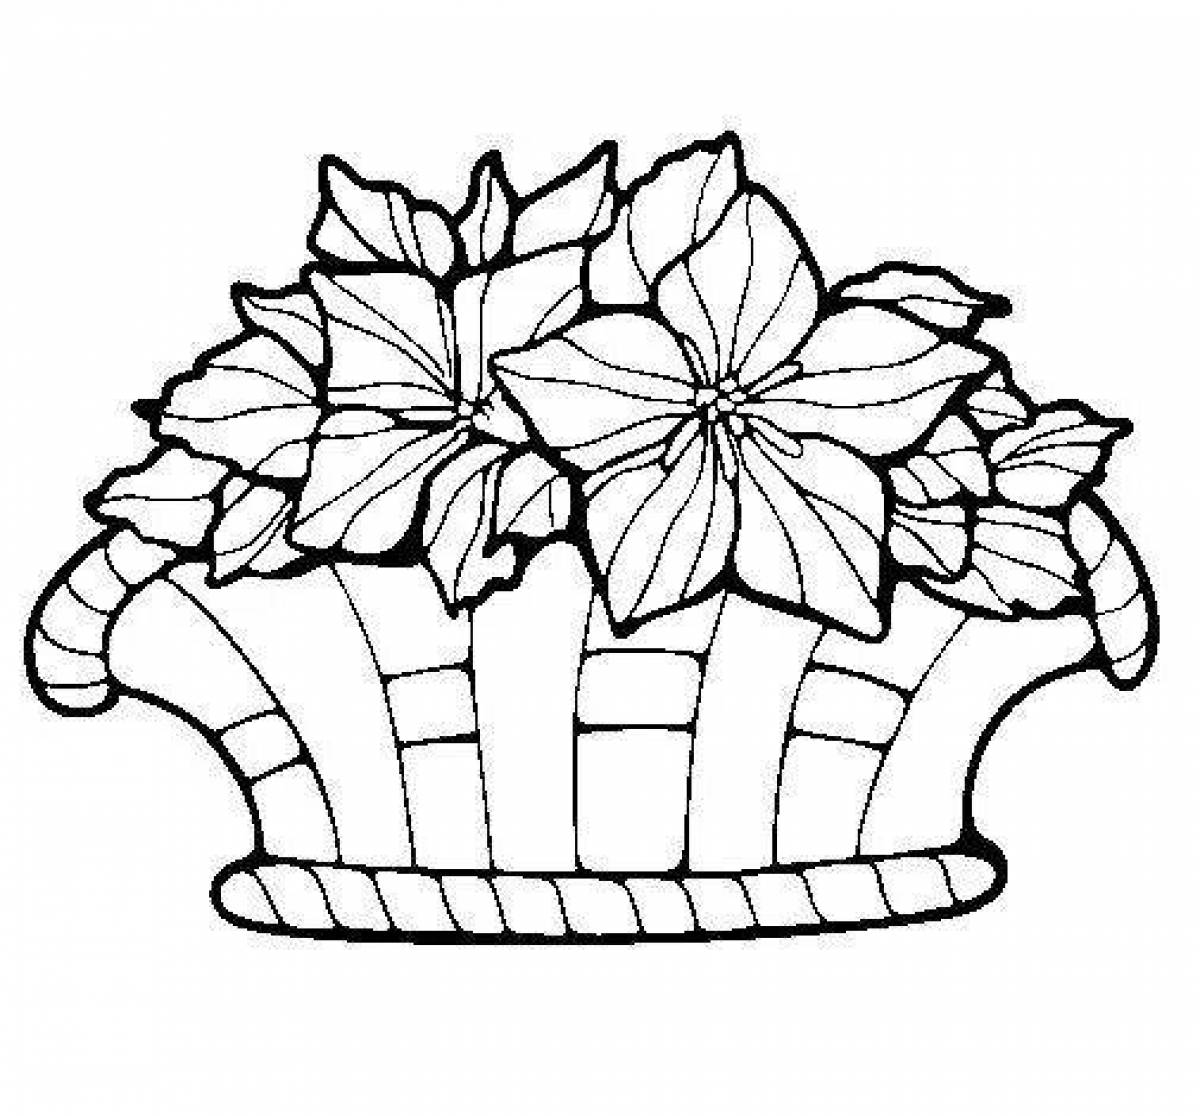 Coloring page dazzling basket of flowers